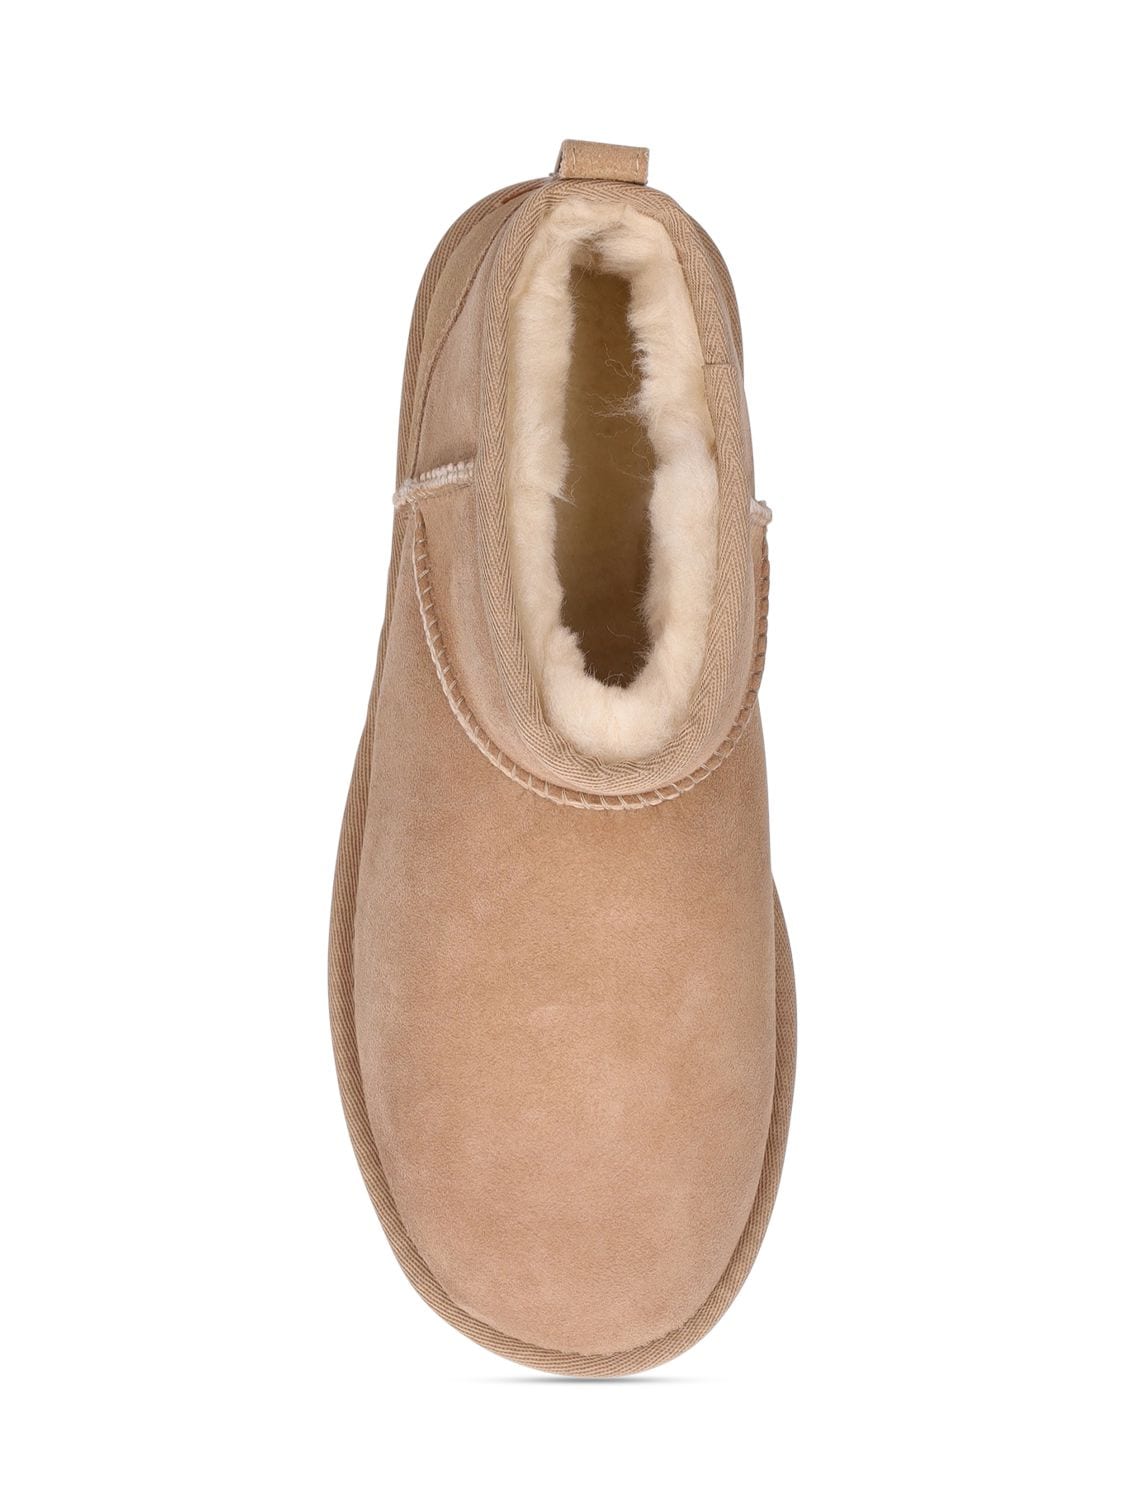 Shop Ugg 10mm Classic Ultra Mini Shearling Boots In Sand